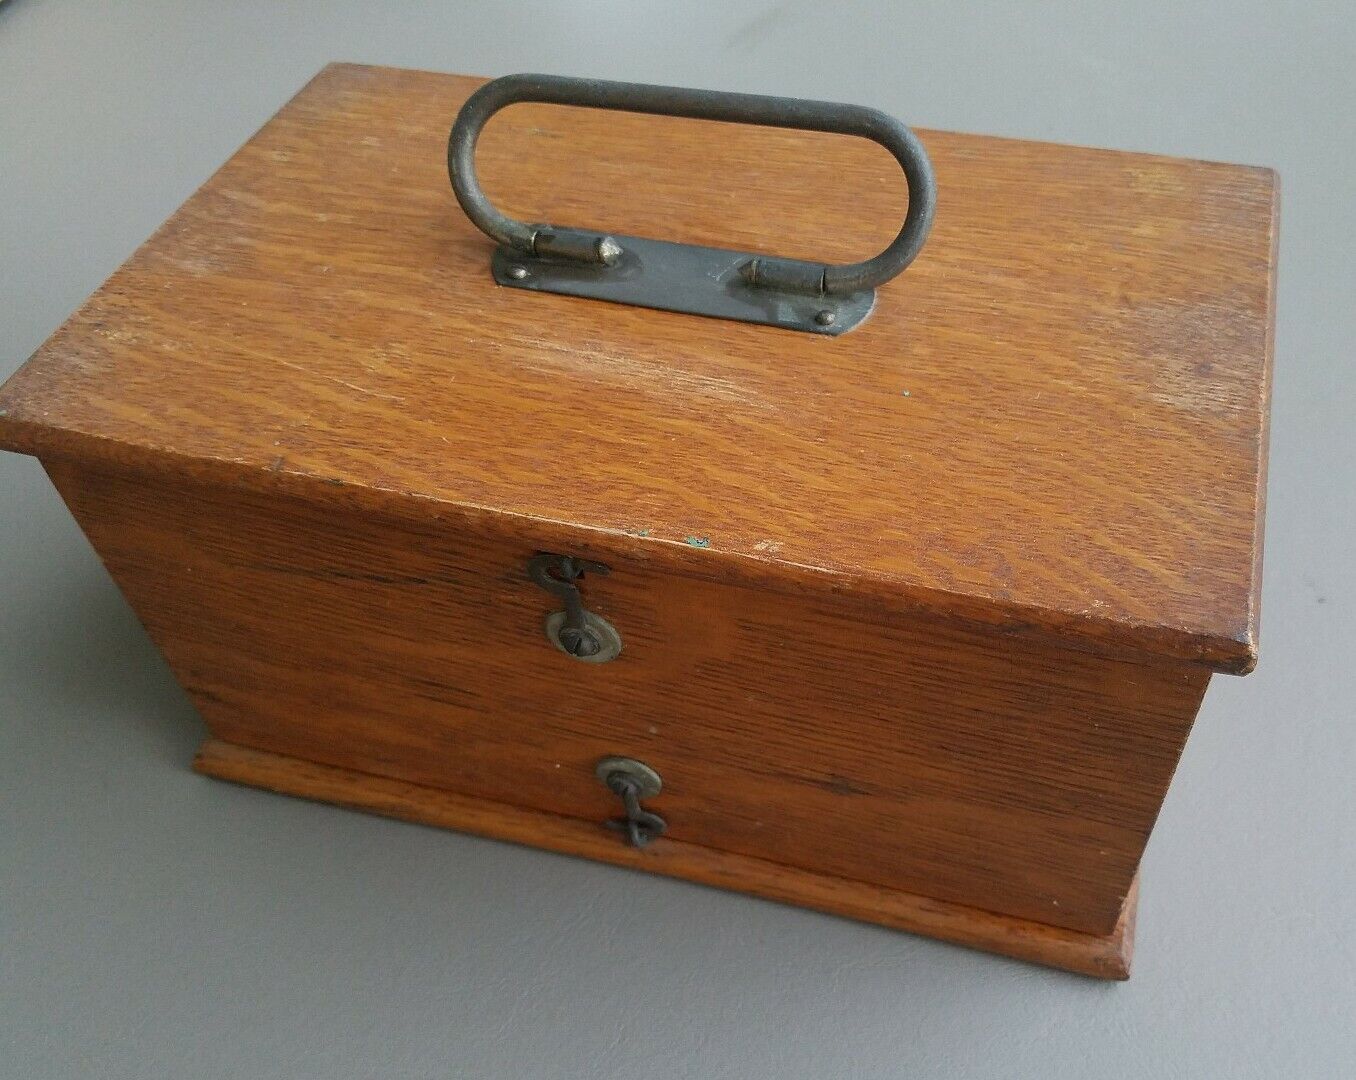 Aged Vintage Wooden Electrical Battery Box Unique Storage RARE